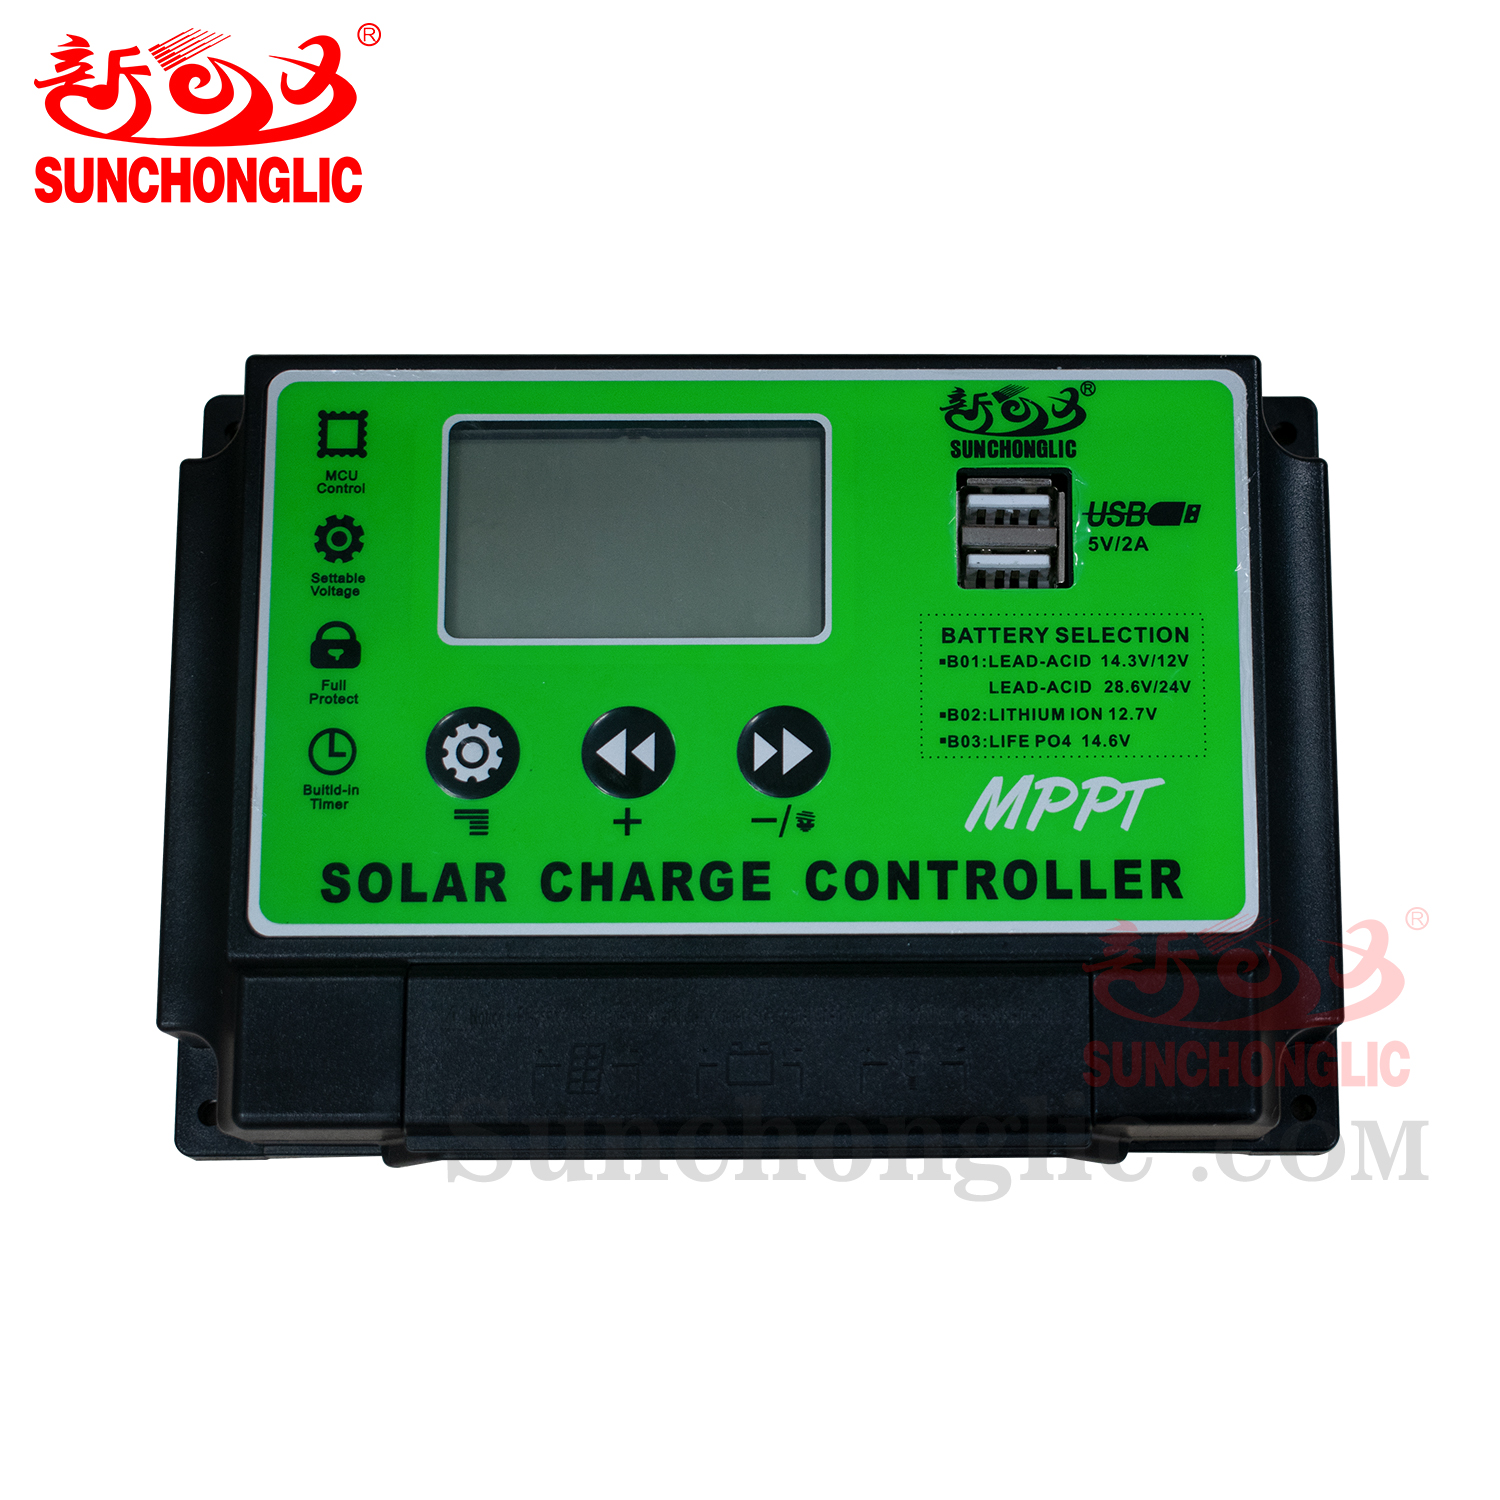 Solar Charge Controller - FT-MP1250